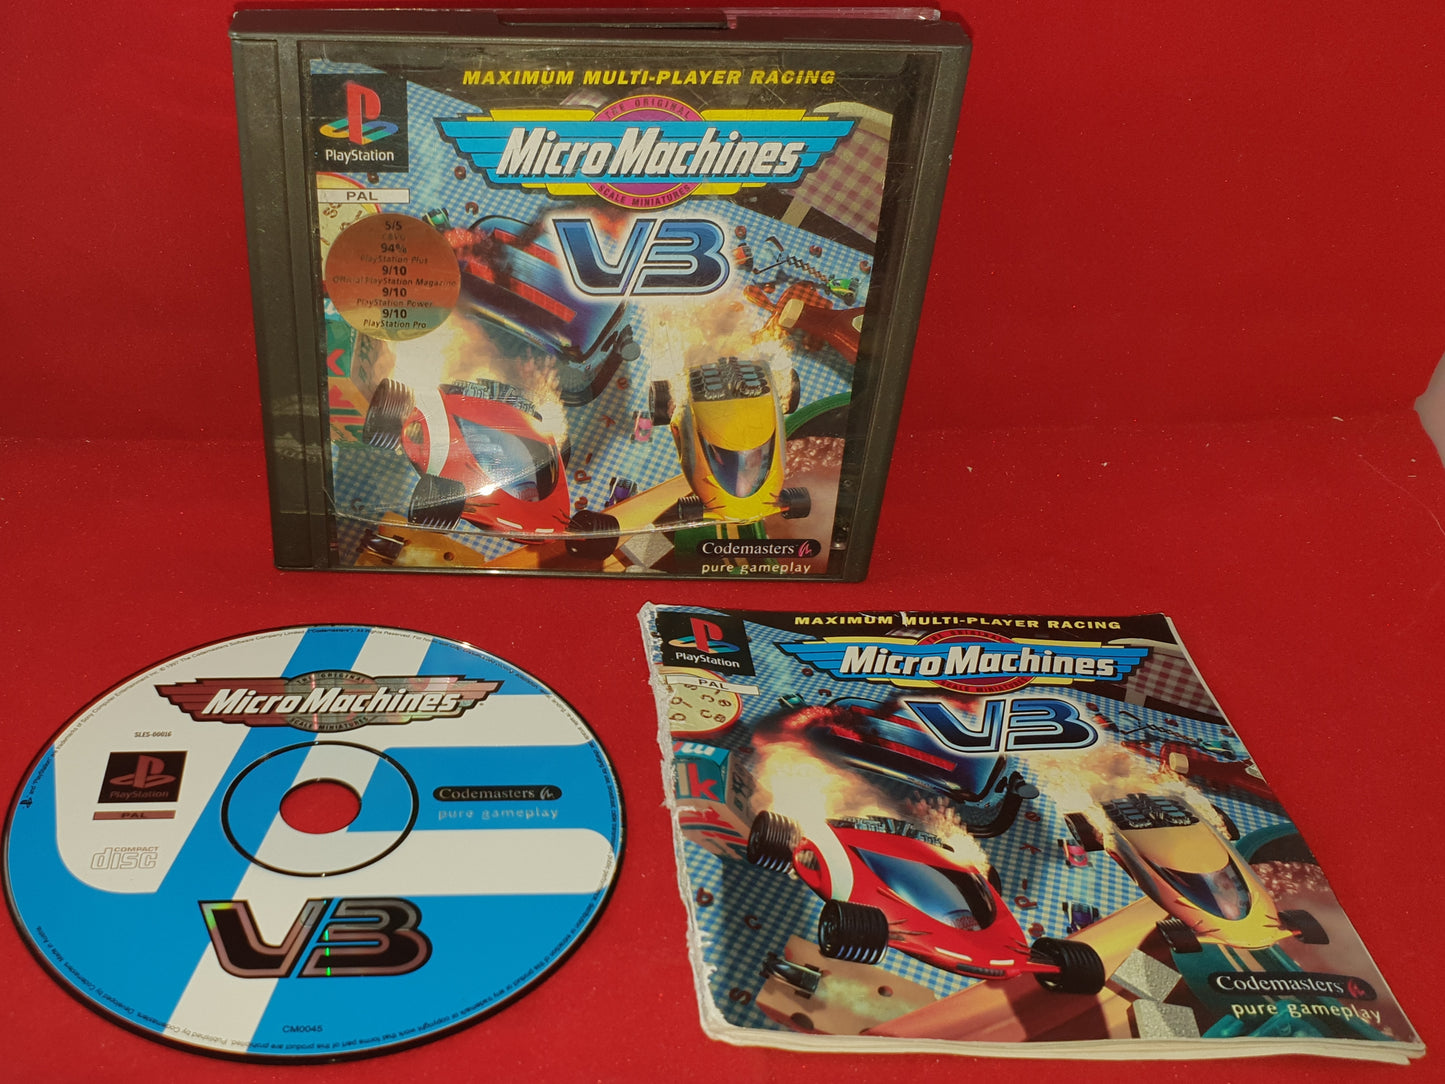 Micro Machines V3 Black Label Sony Playstation 1 (PS1) Game